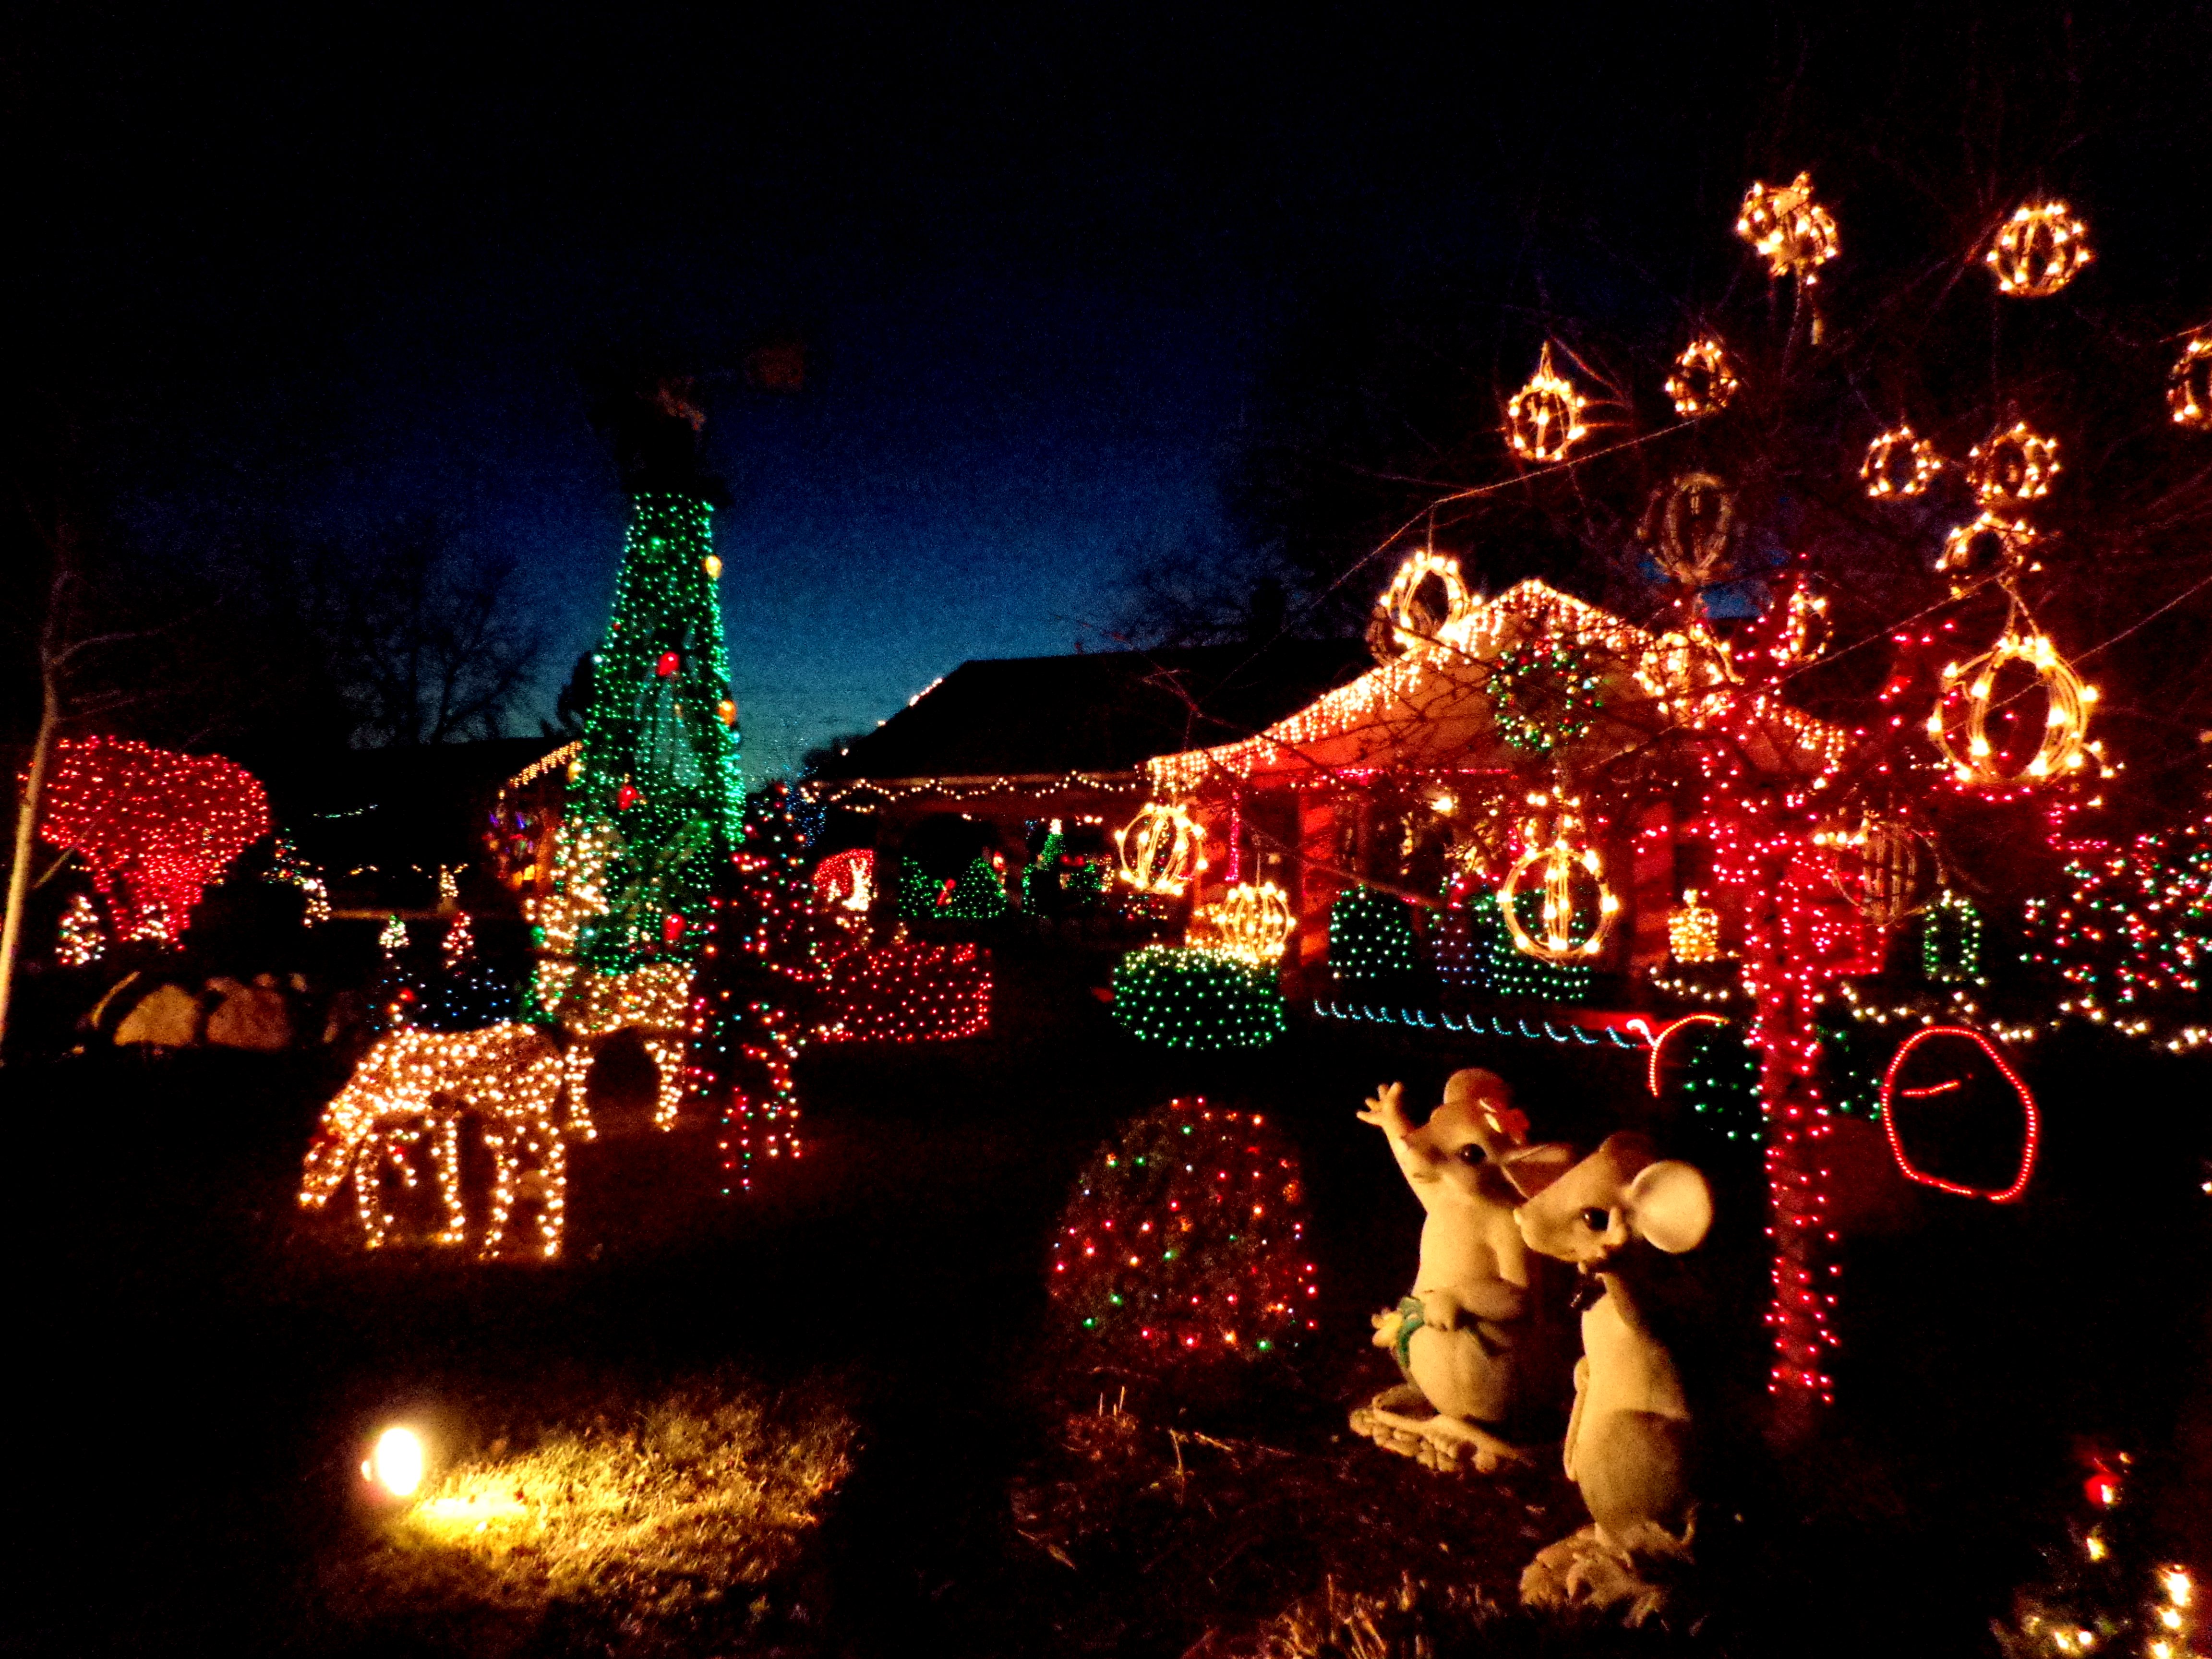 Christmas Lights Yard full of Holiday Decorations Picture | Free